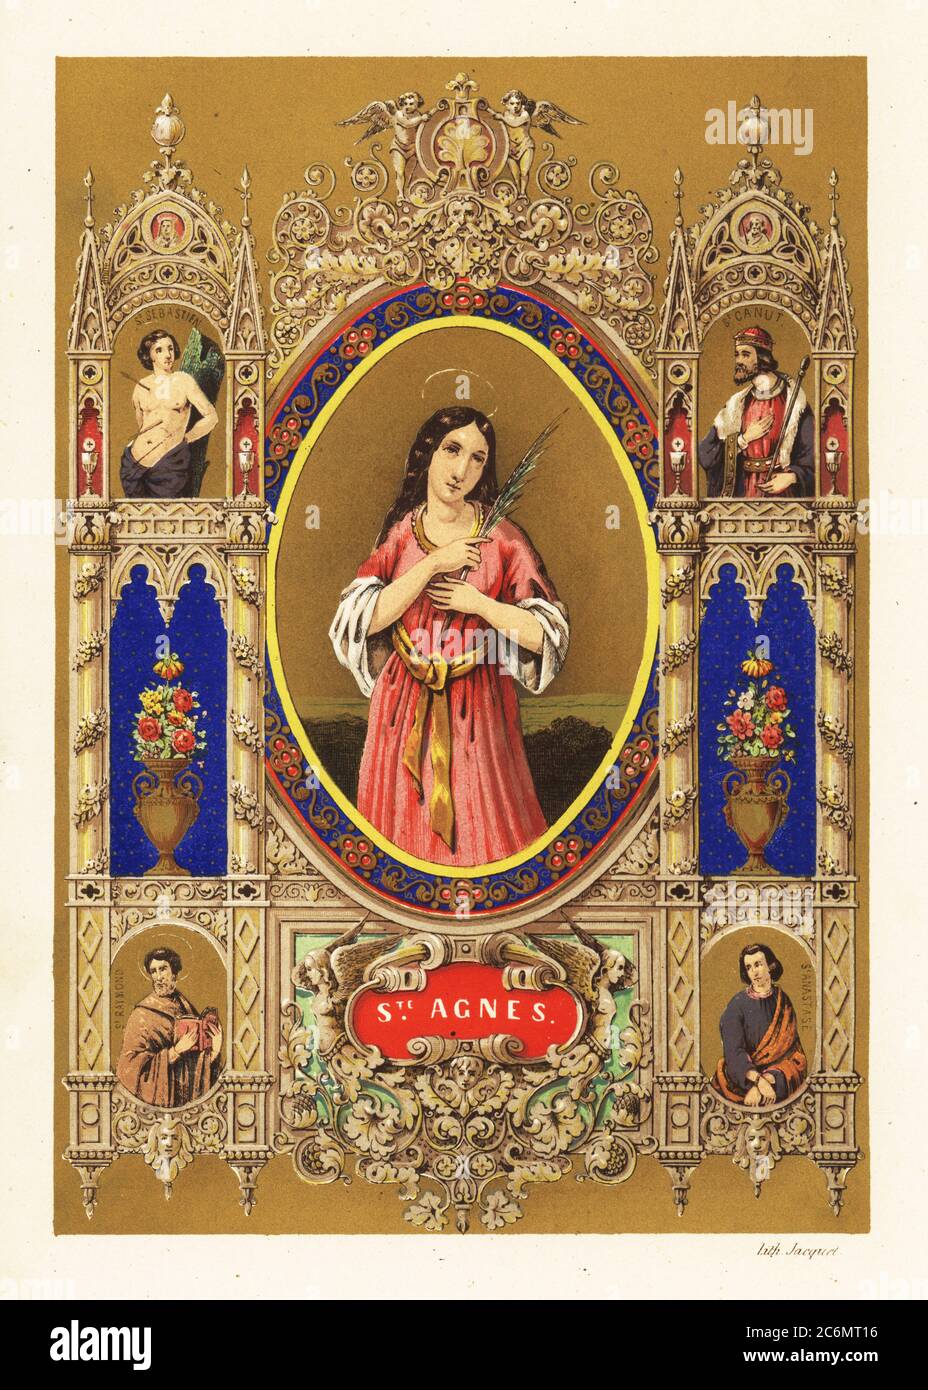 Portrait of Saint Agnes of Rome, virgin martyr, with halo and palm frond within decorative border. Vignettes of martyr Saint Sebastian, King Canute the Holy or Saint Canute, Saint Anatasia of Sirmium, Anastasia the Pharmakolytria, and Saint Raymond of Fitero. Chromolithograph by Jacquet from Legende Celeste, nouvelle histoire de la Vie des Saints, Celestial Legend, Lives of the Saints, Paul Mellier, Paris, 1845. Stock Photo